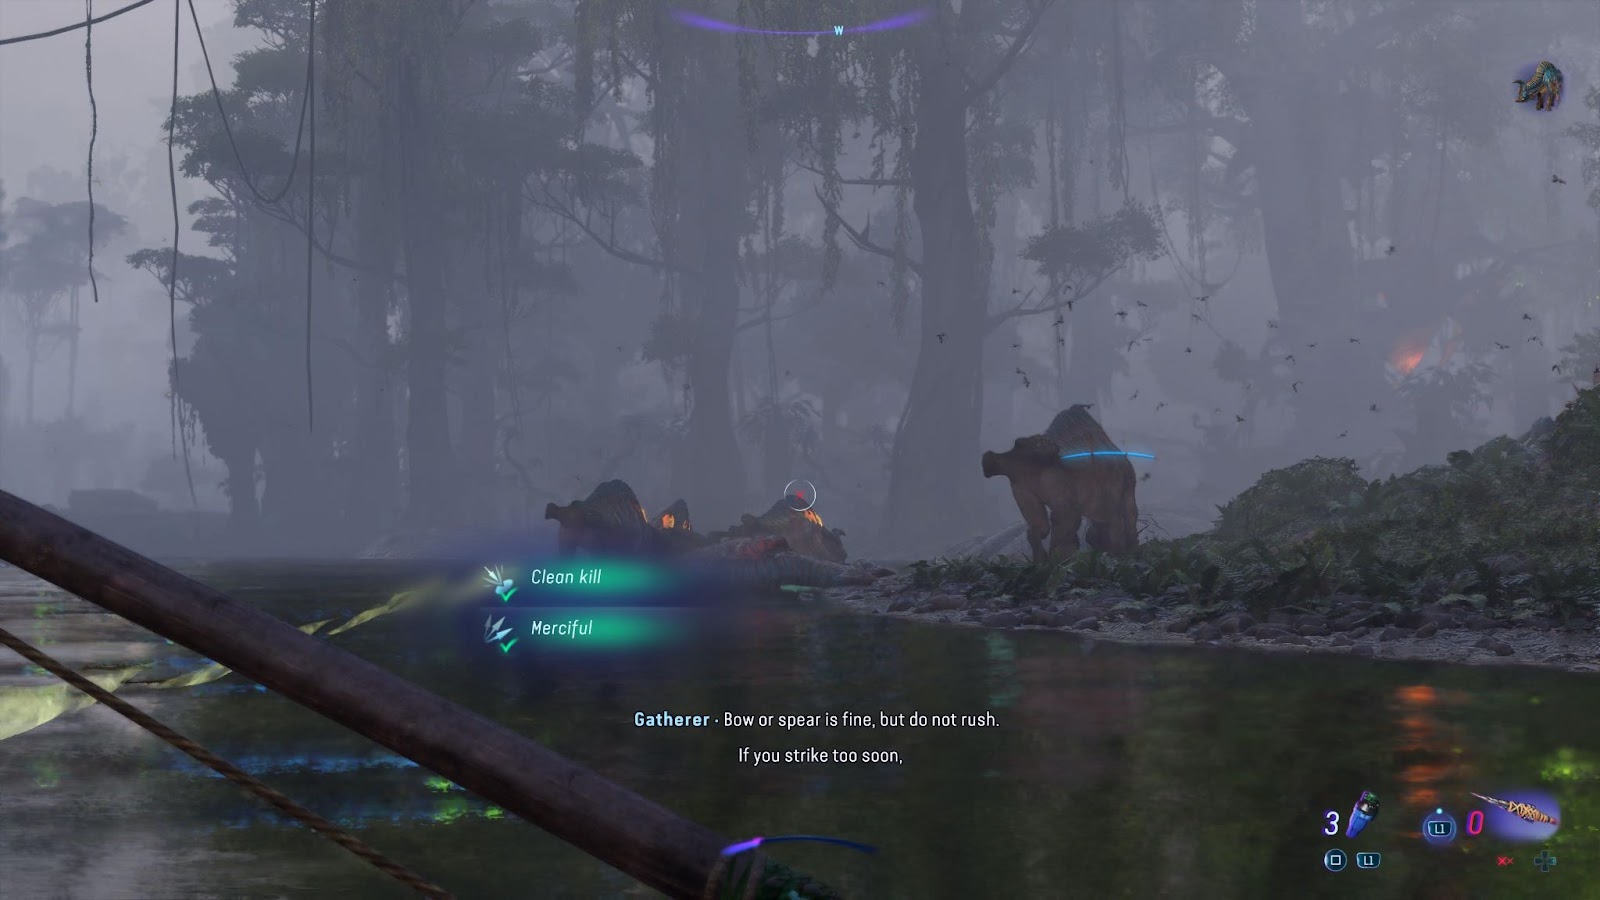 An in game screenshot of hunting in the game Avatar: Frontiers of Pandora